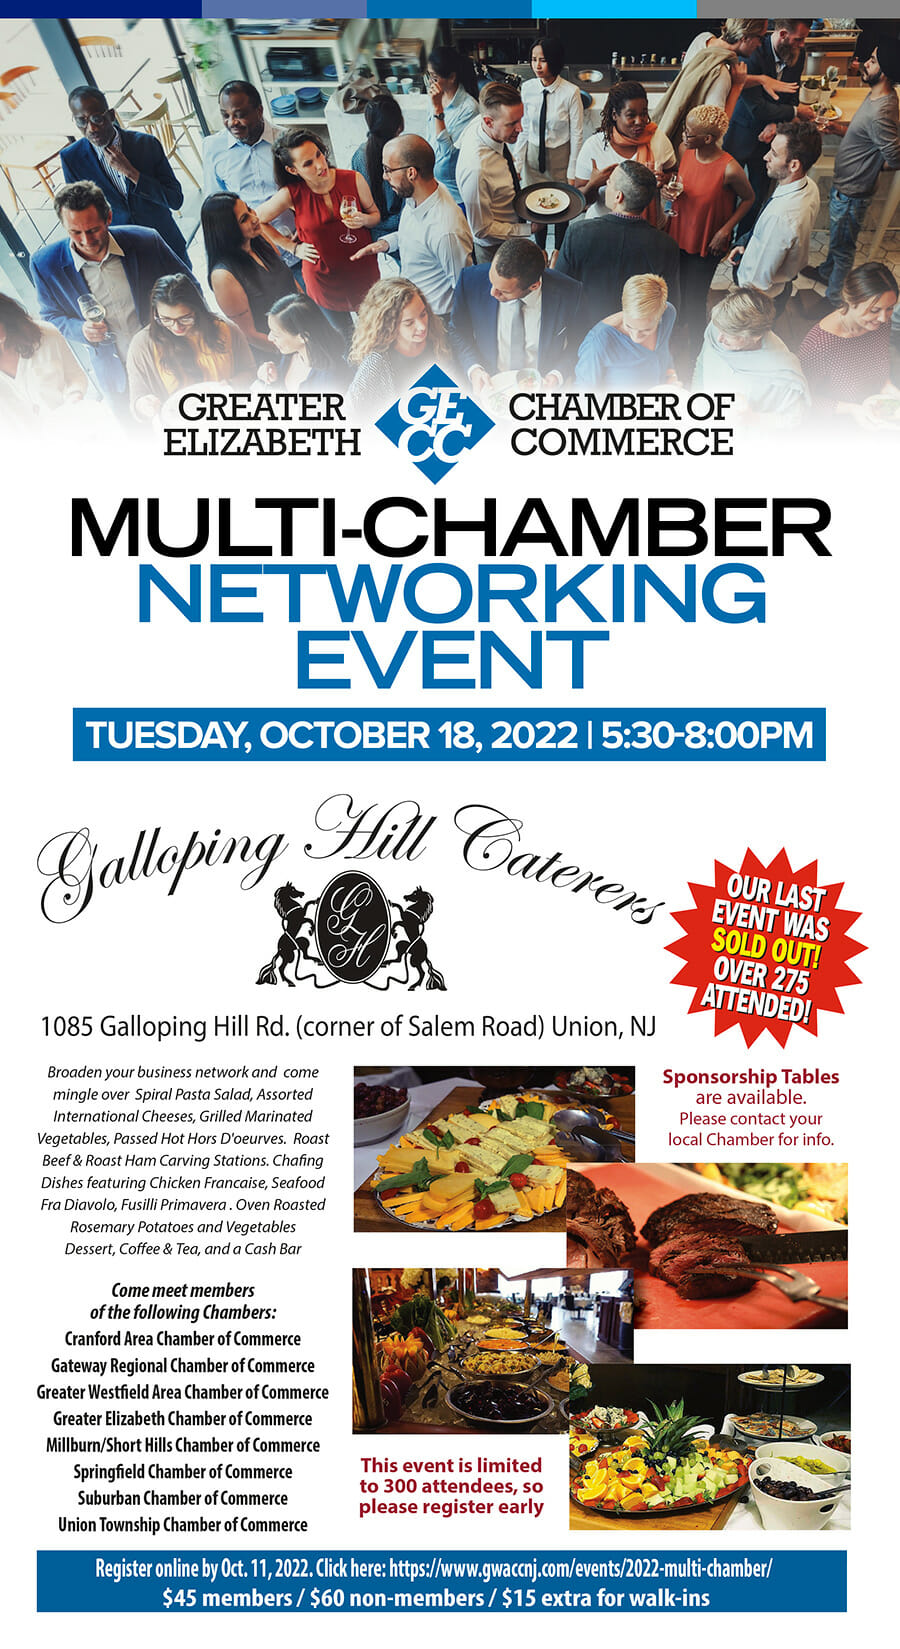 Multi-Chamber Networking Event at Galloping Hill Caterers